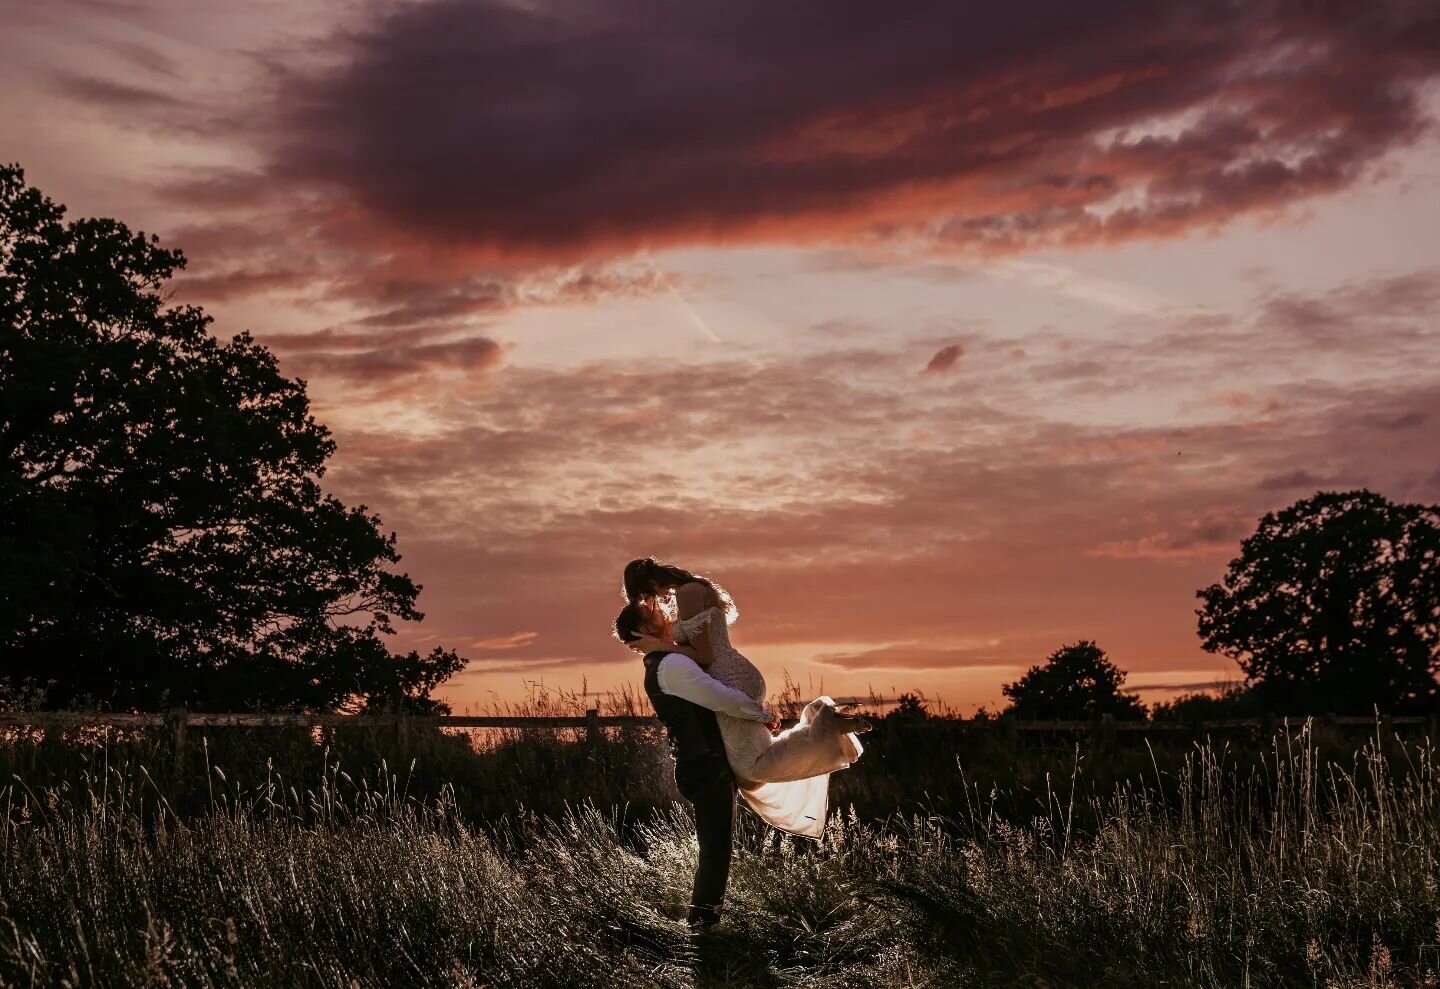 As far as sunsets go, Annabelle &amp; Charlie couldn't have asked for a better one! 

Wonderful working with @thecrowthersphotoandfilm

@belle_pickering 
@thehallbarns